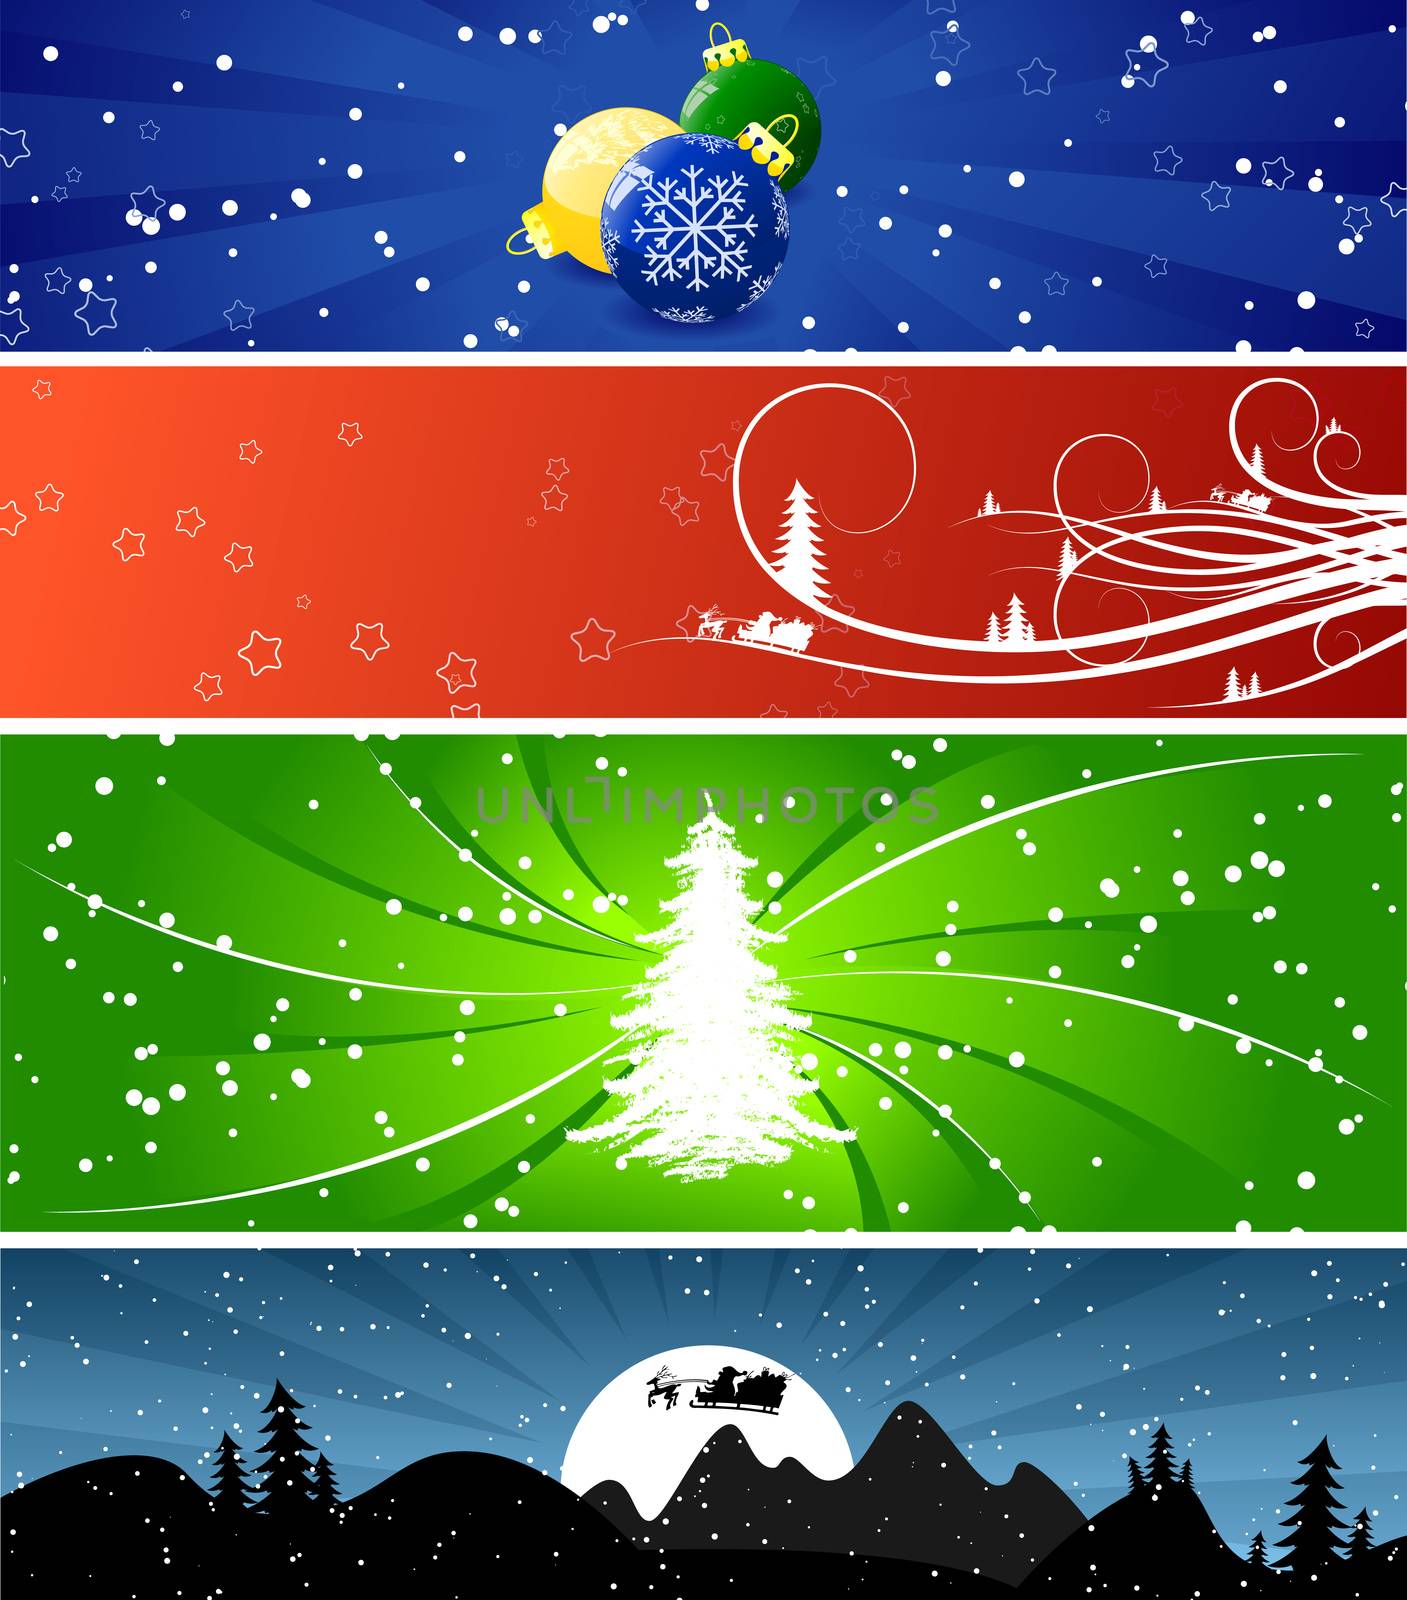 Four color Winter Christmsa banners with trees, snow and flakes